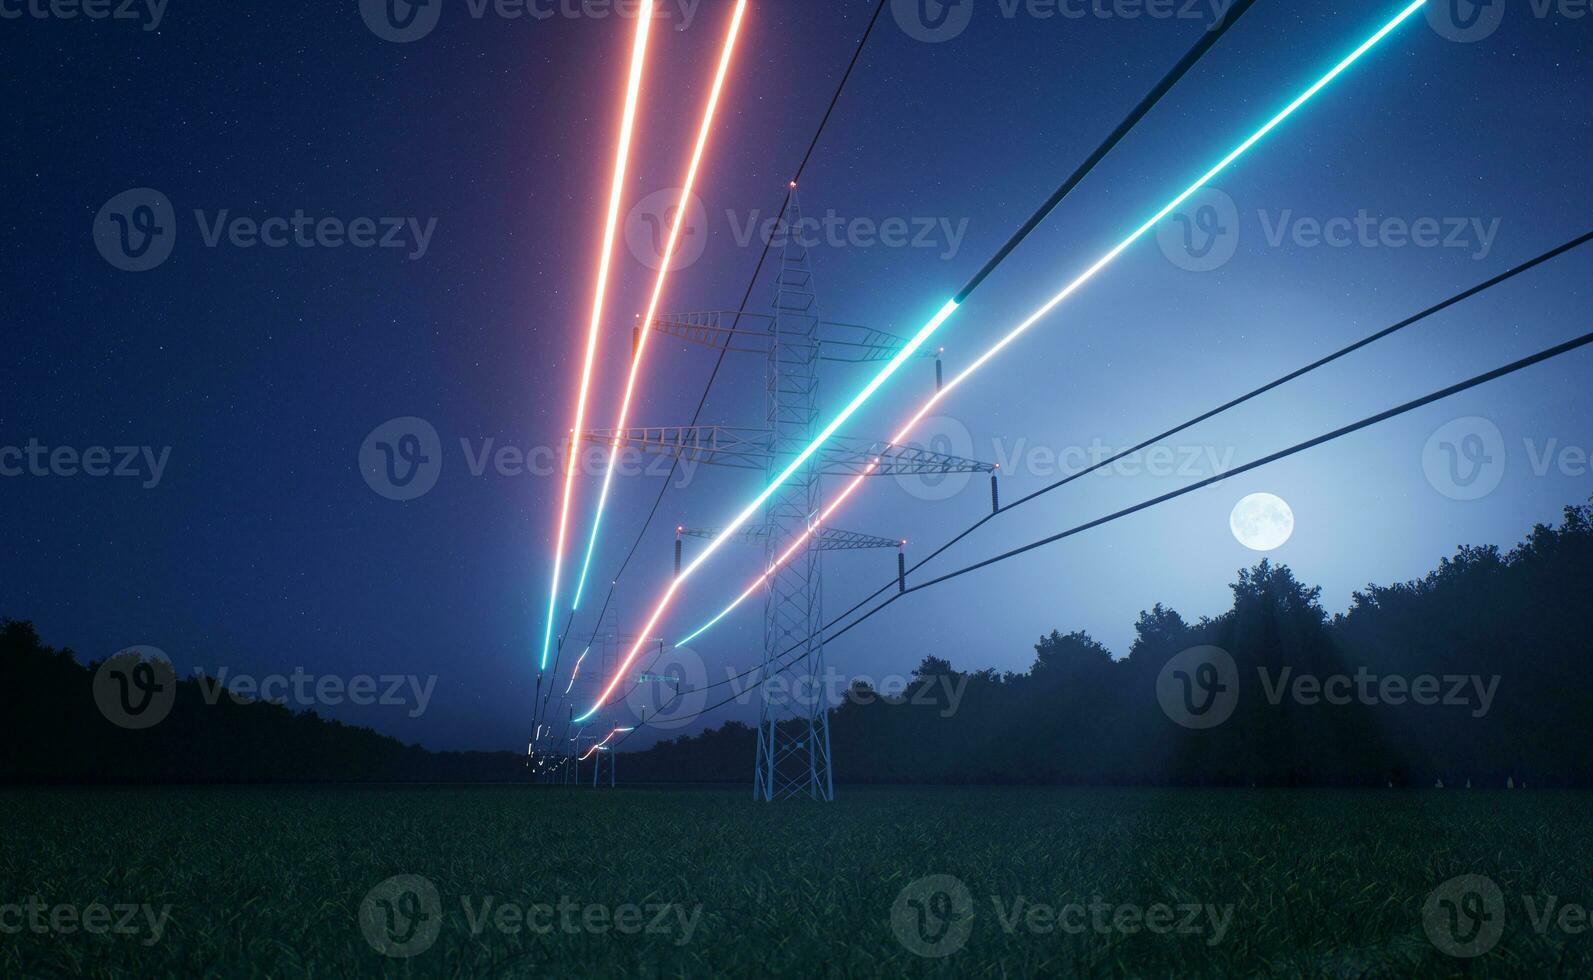 Visualization of energy flowing through power tower lines over night sky. Infrastructure ensuring transmission of electricity through voltage distribution cables, 3D render animation photo